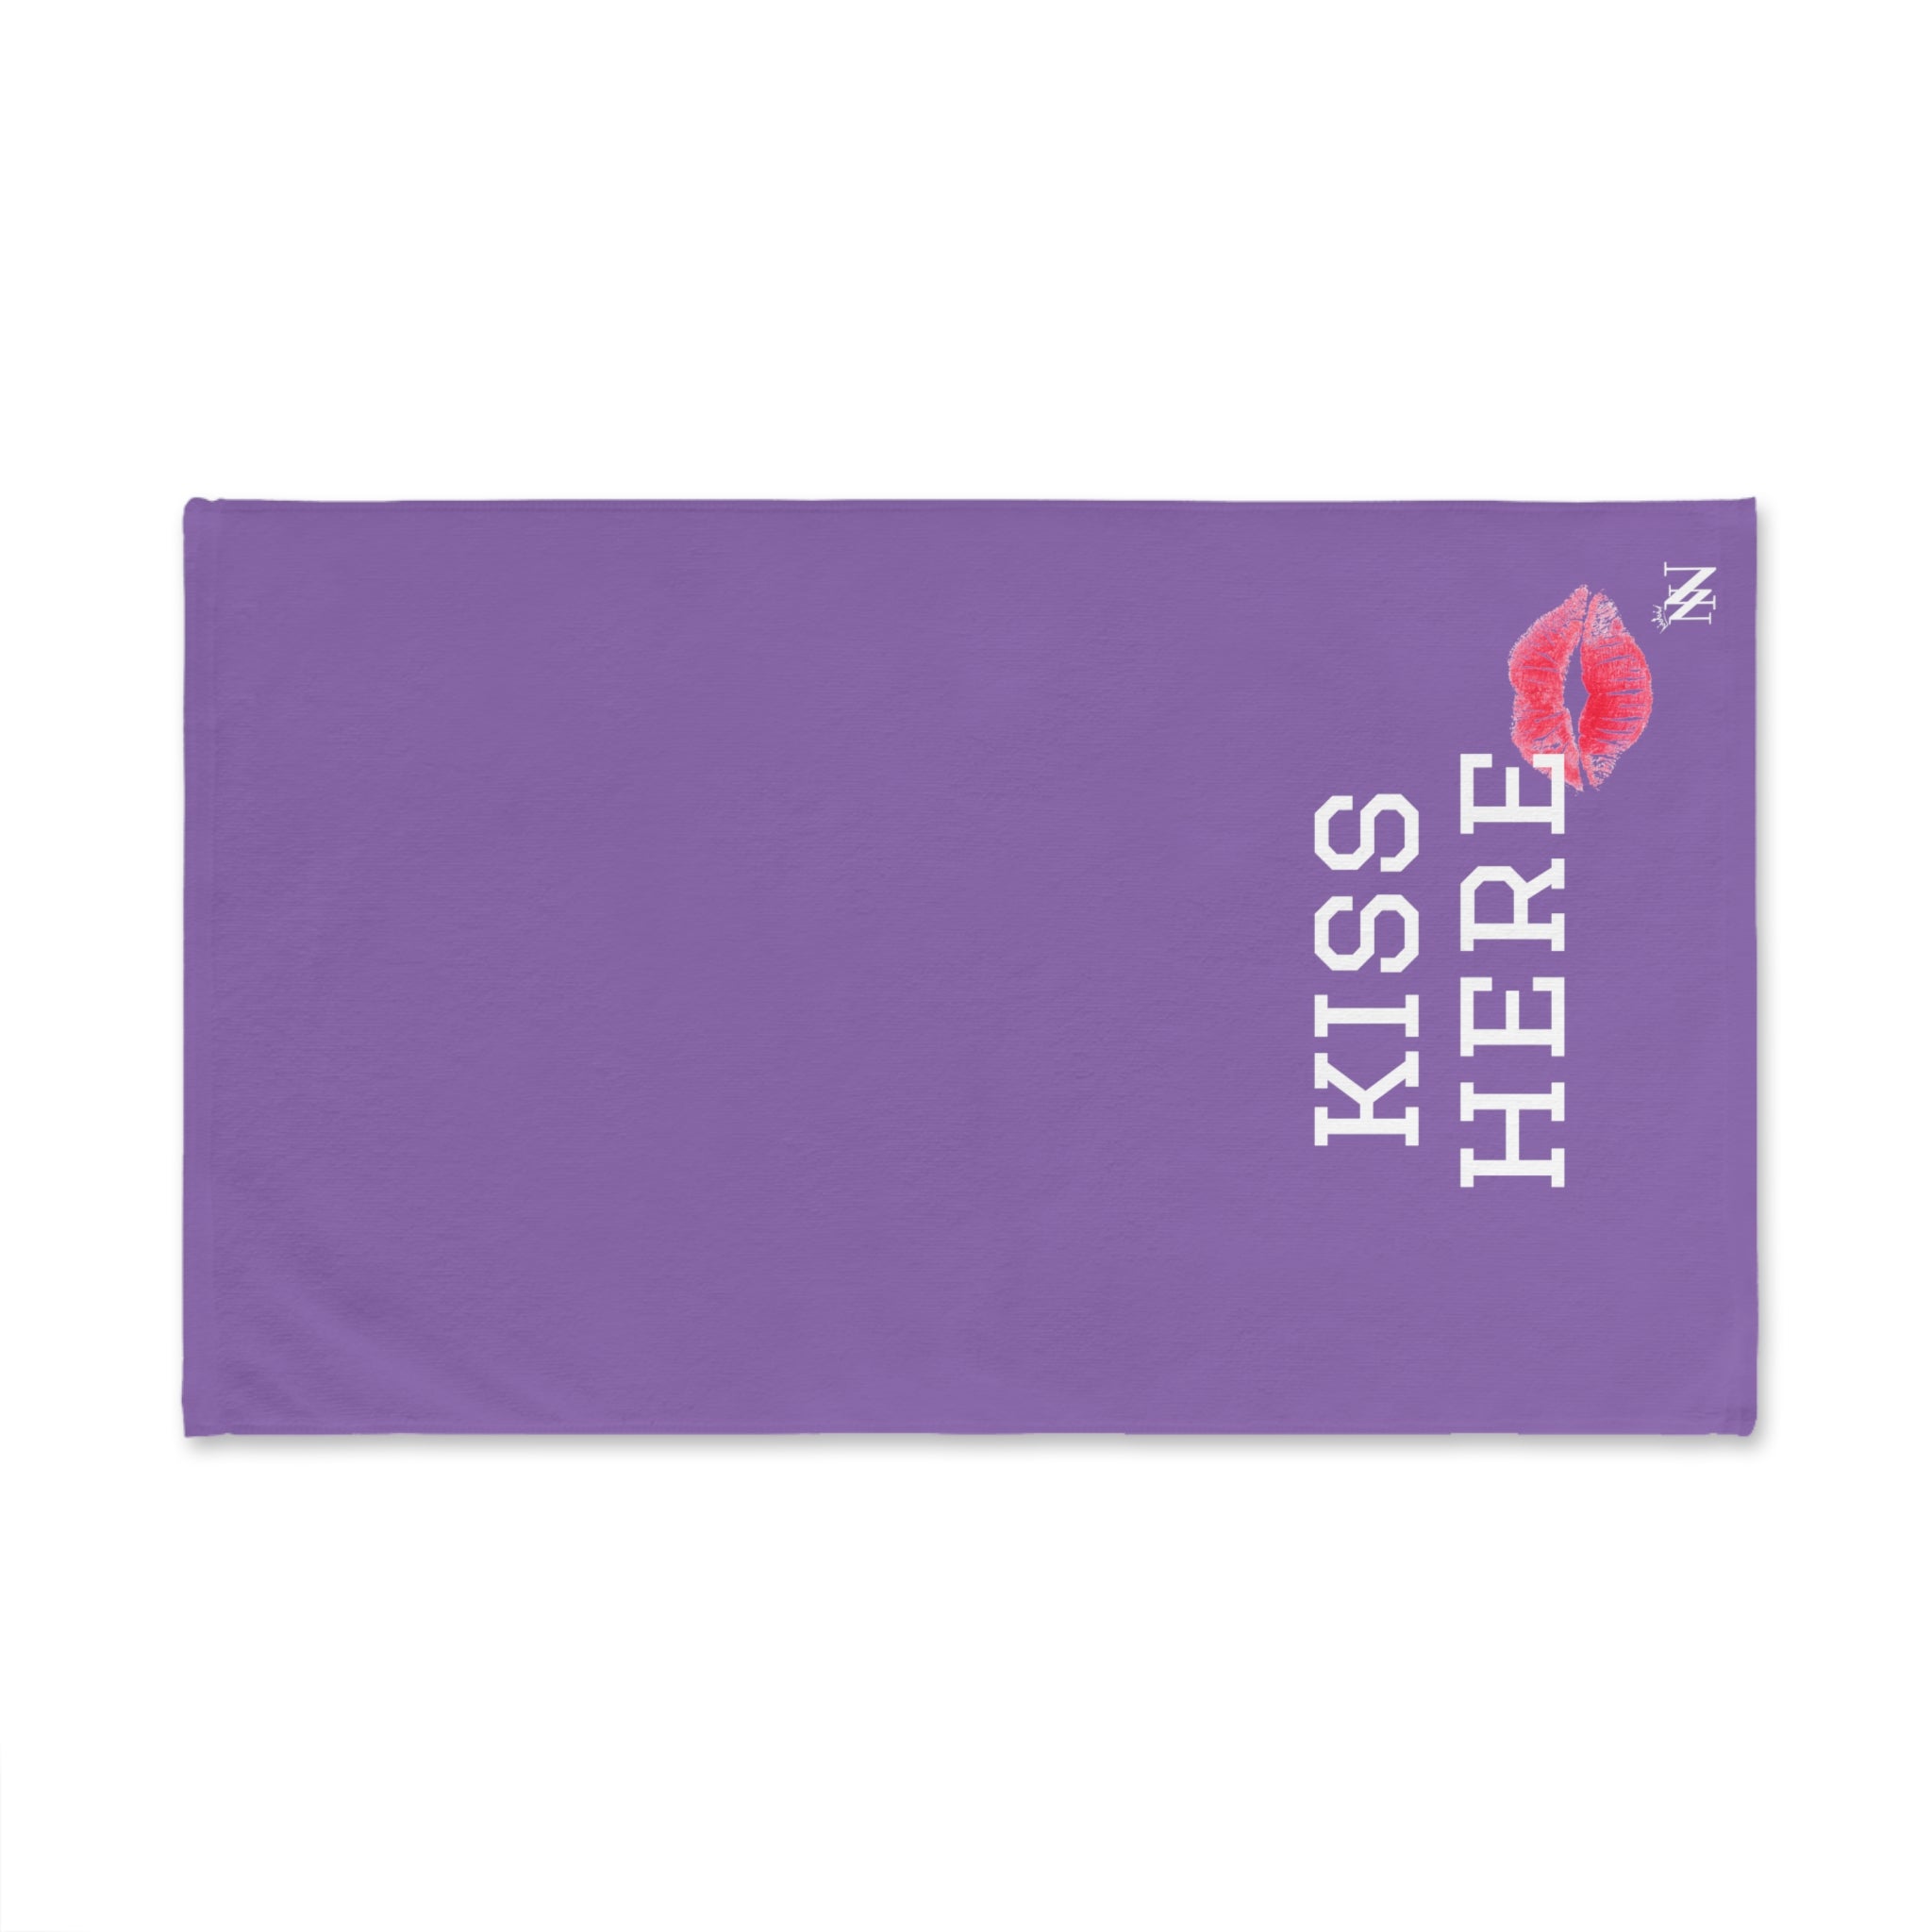 Kiss Here Lips Lavendar | Funny Gifts for Men - Gifts for Him - Birthday Gifts for Men, Him, Husband, Boyfriend, New Couple Gifts, Fathers & Valentines Day Gifts, Hand Towels NECTAR NAPKINS